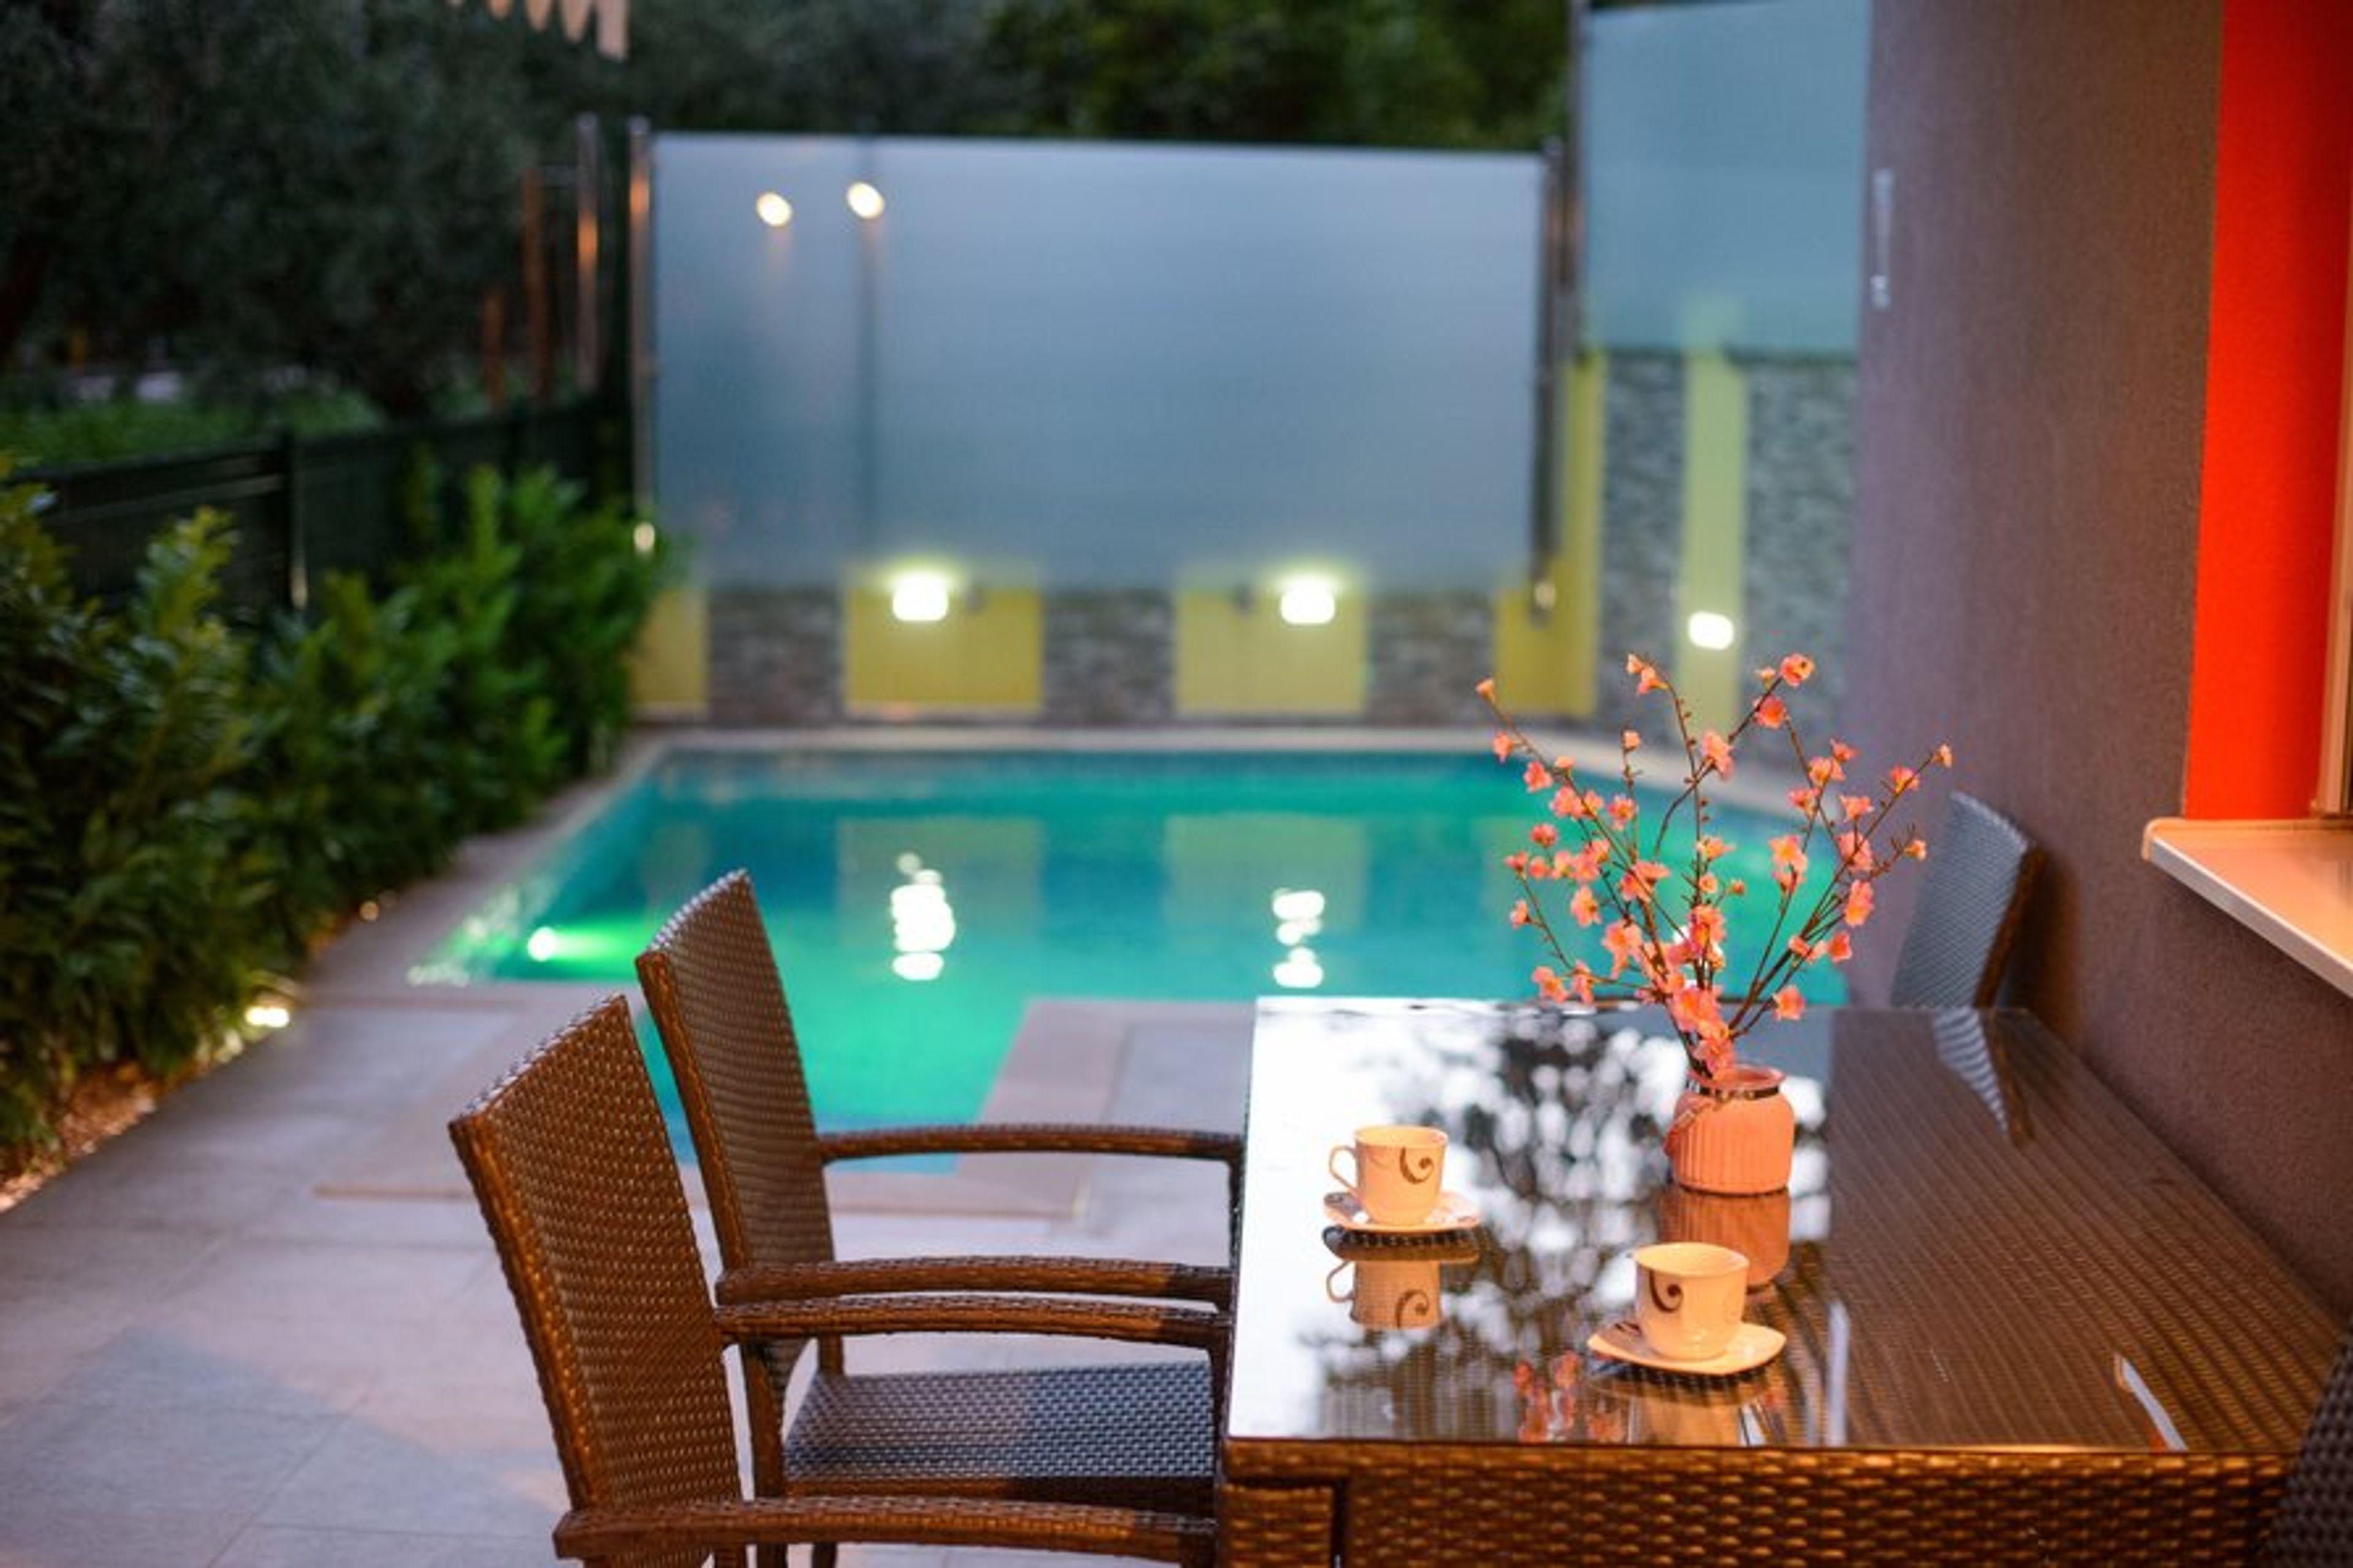 Private terrace with pool!
